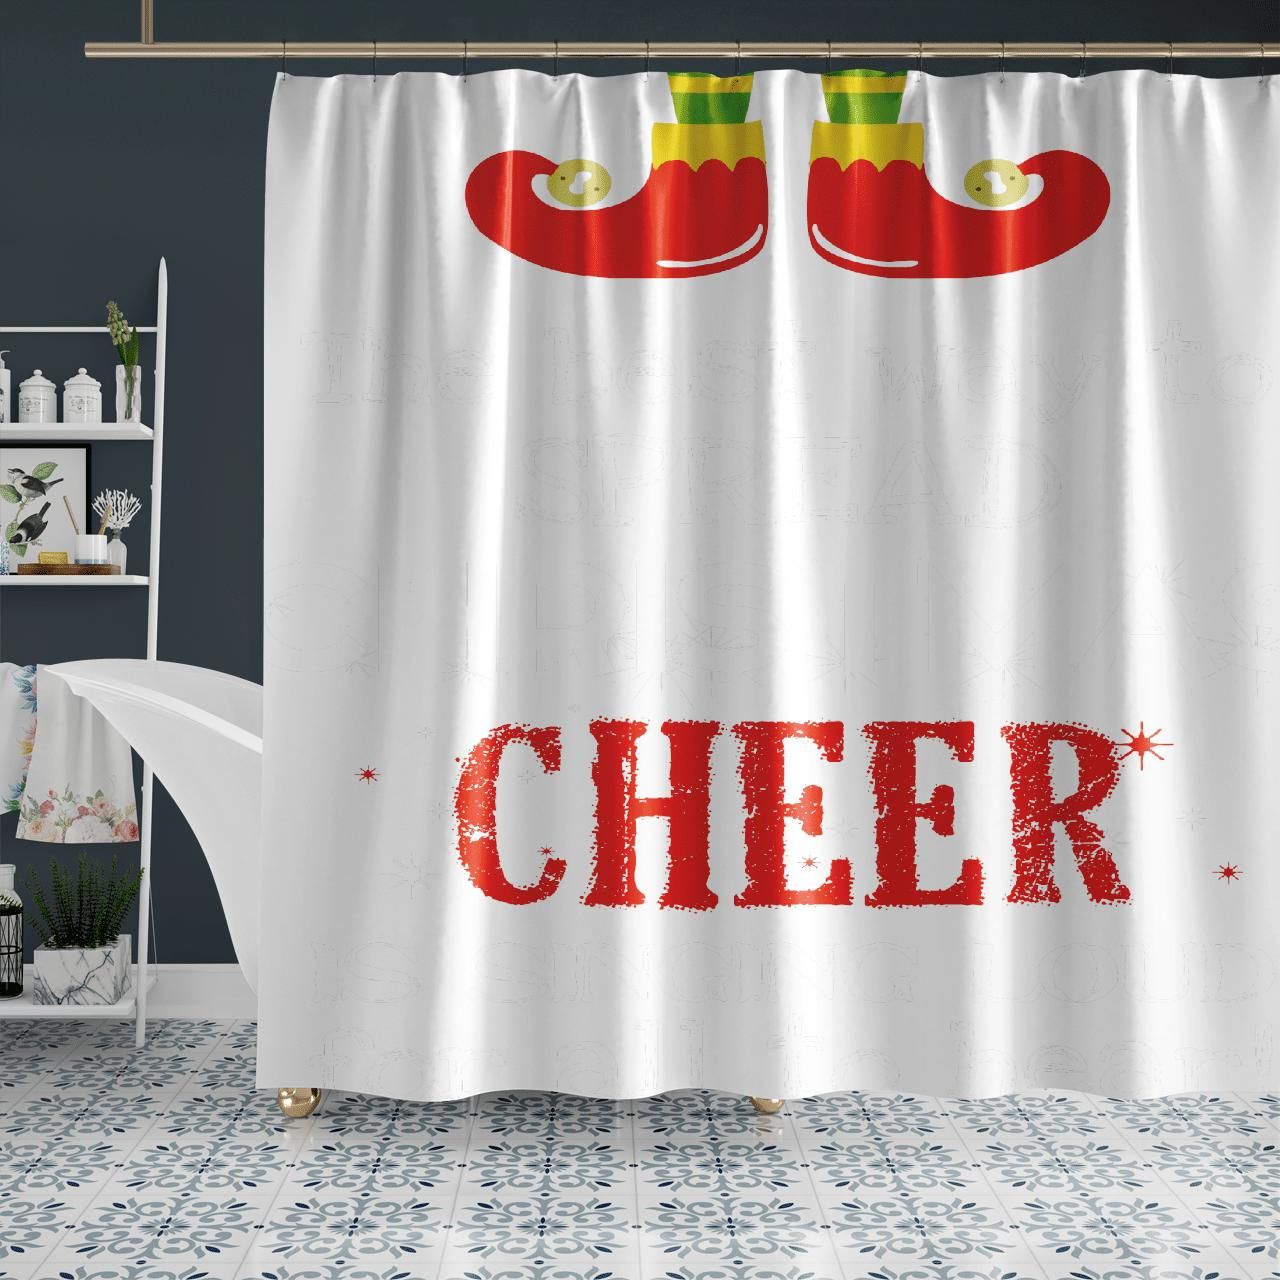 The Best Way To Spread Christmas Cheer Is Singing Loud Shower Curtain